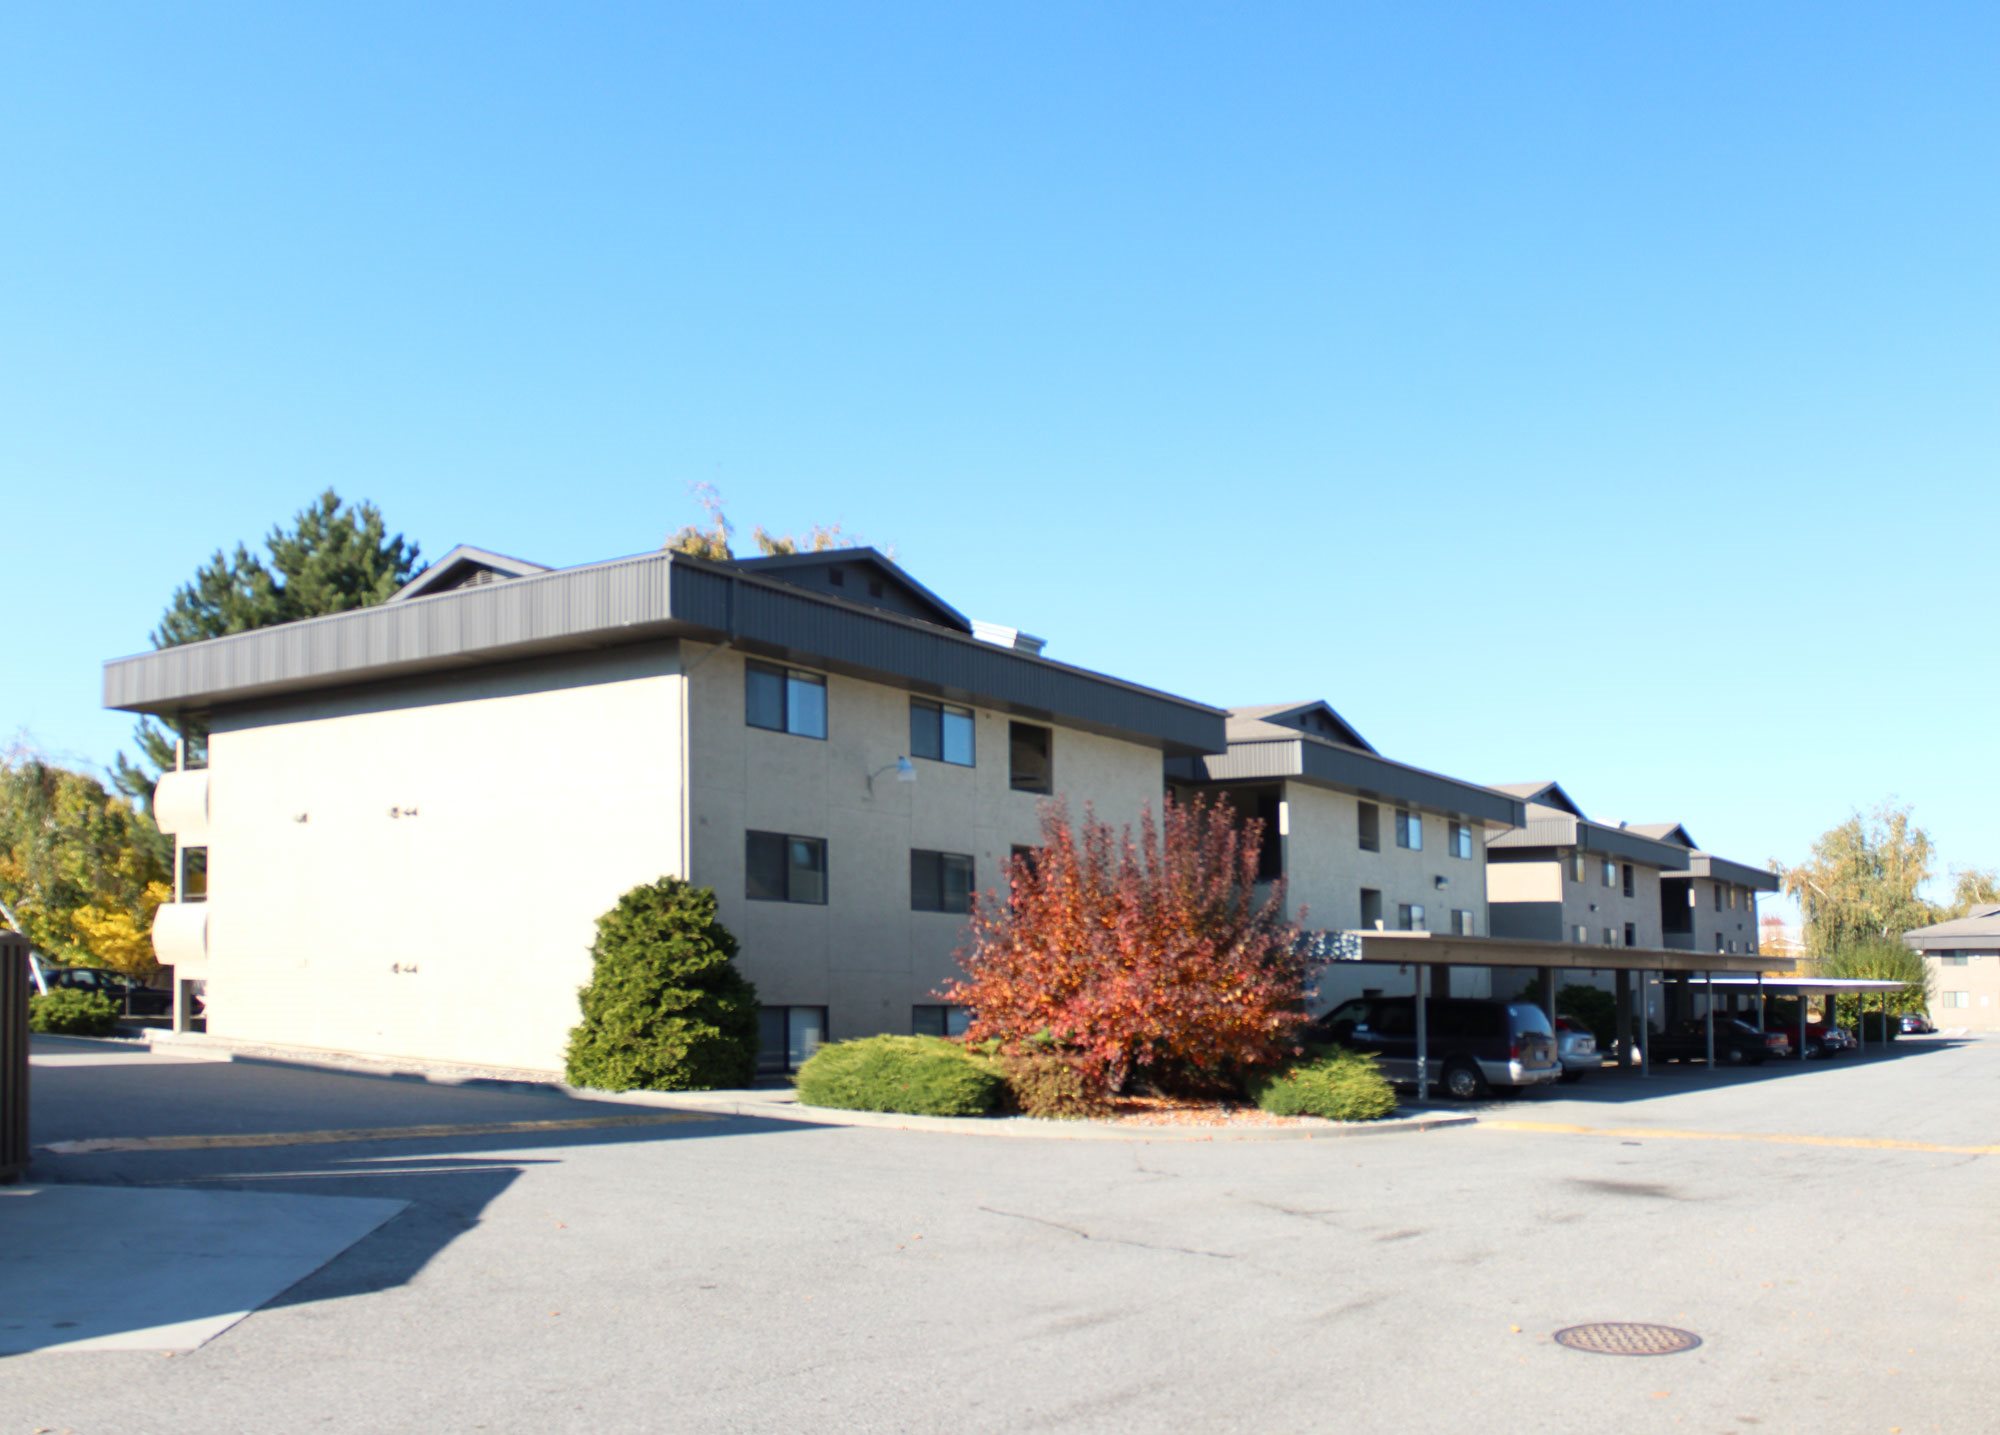 Photos and Video of Sullivan Court Apartments in Spokane Valley WA